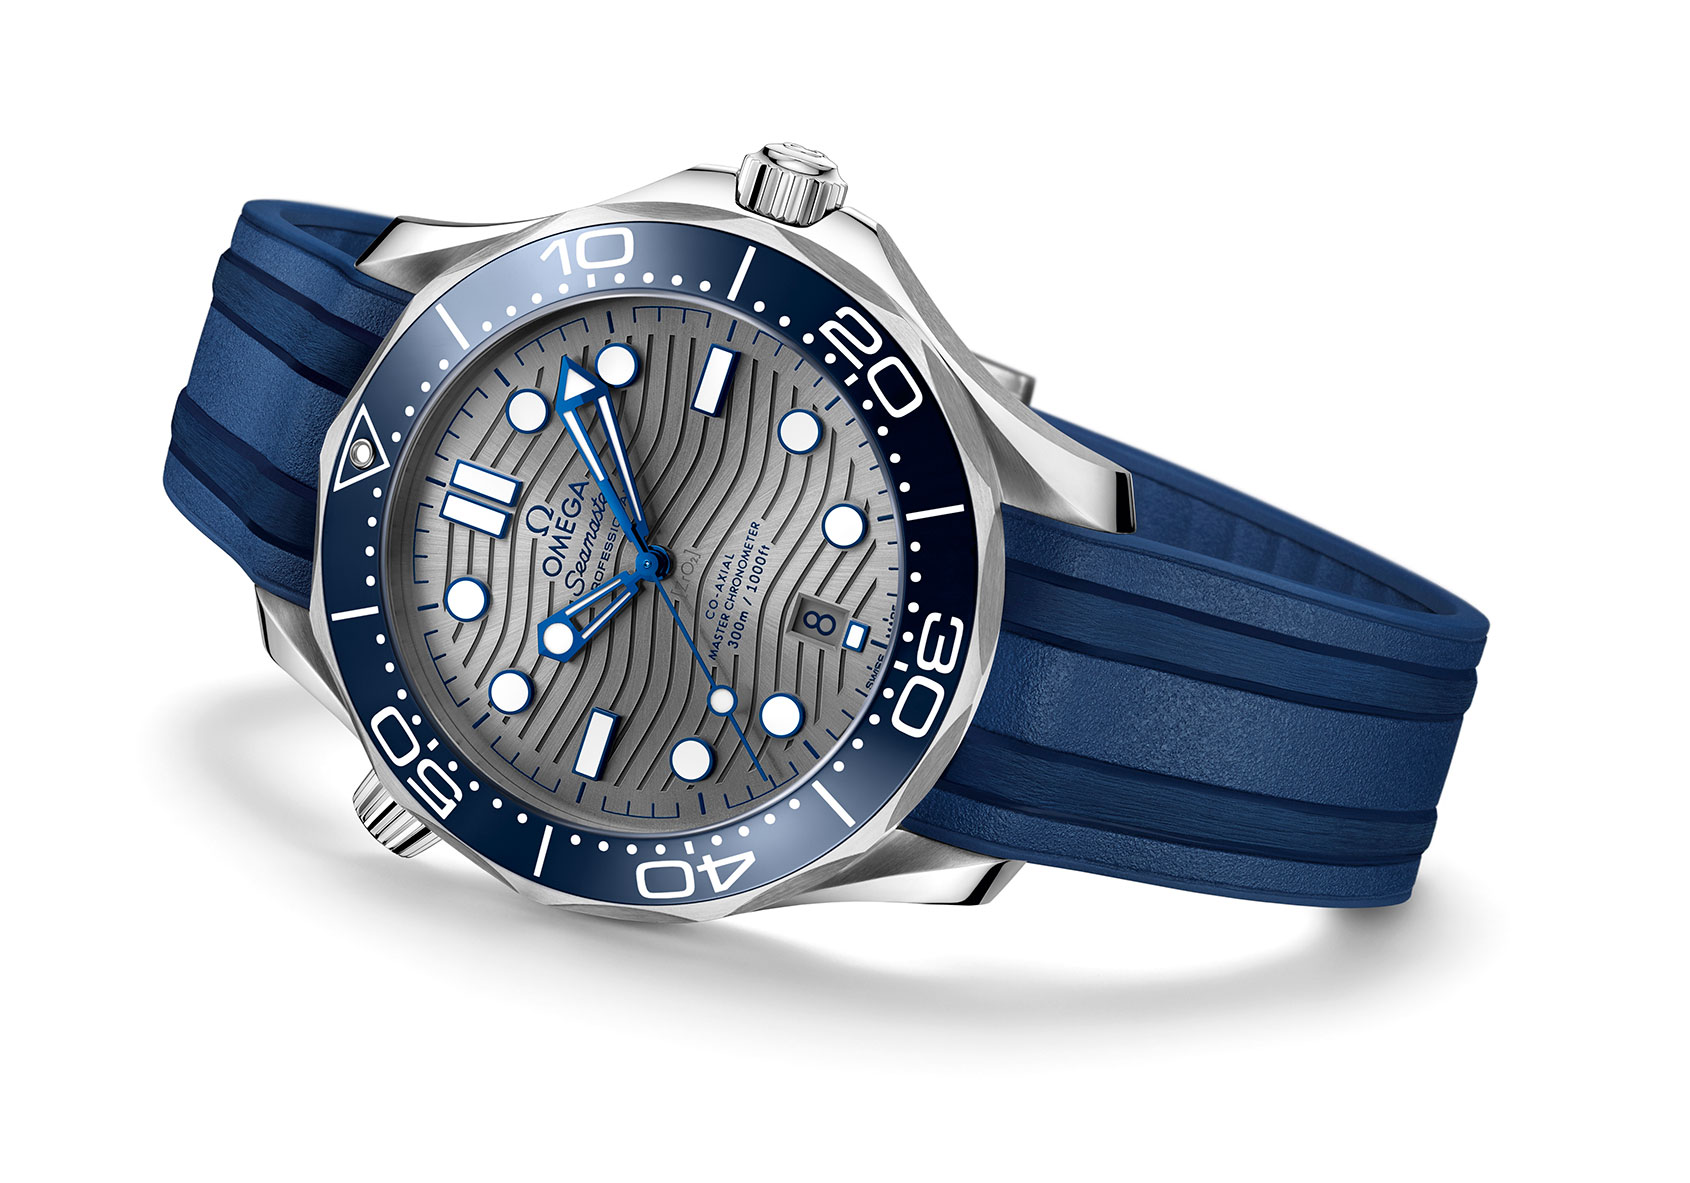 The Omega Seamaster Diver 300 gets a 